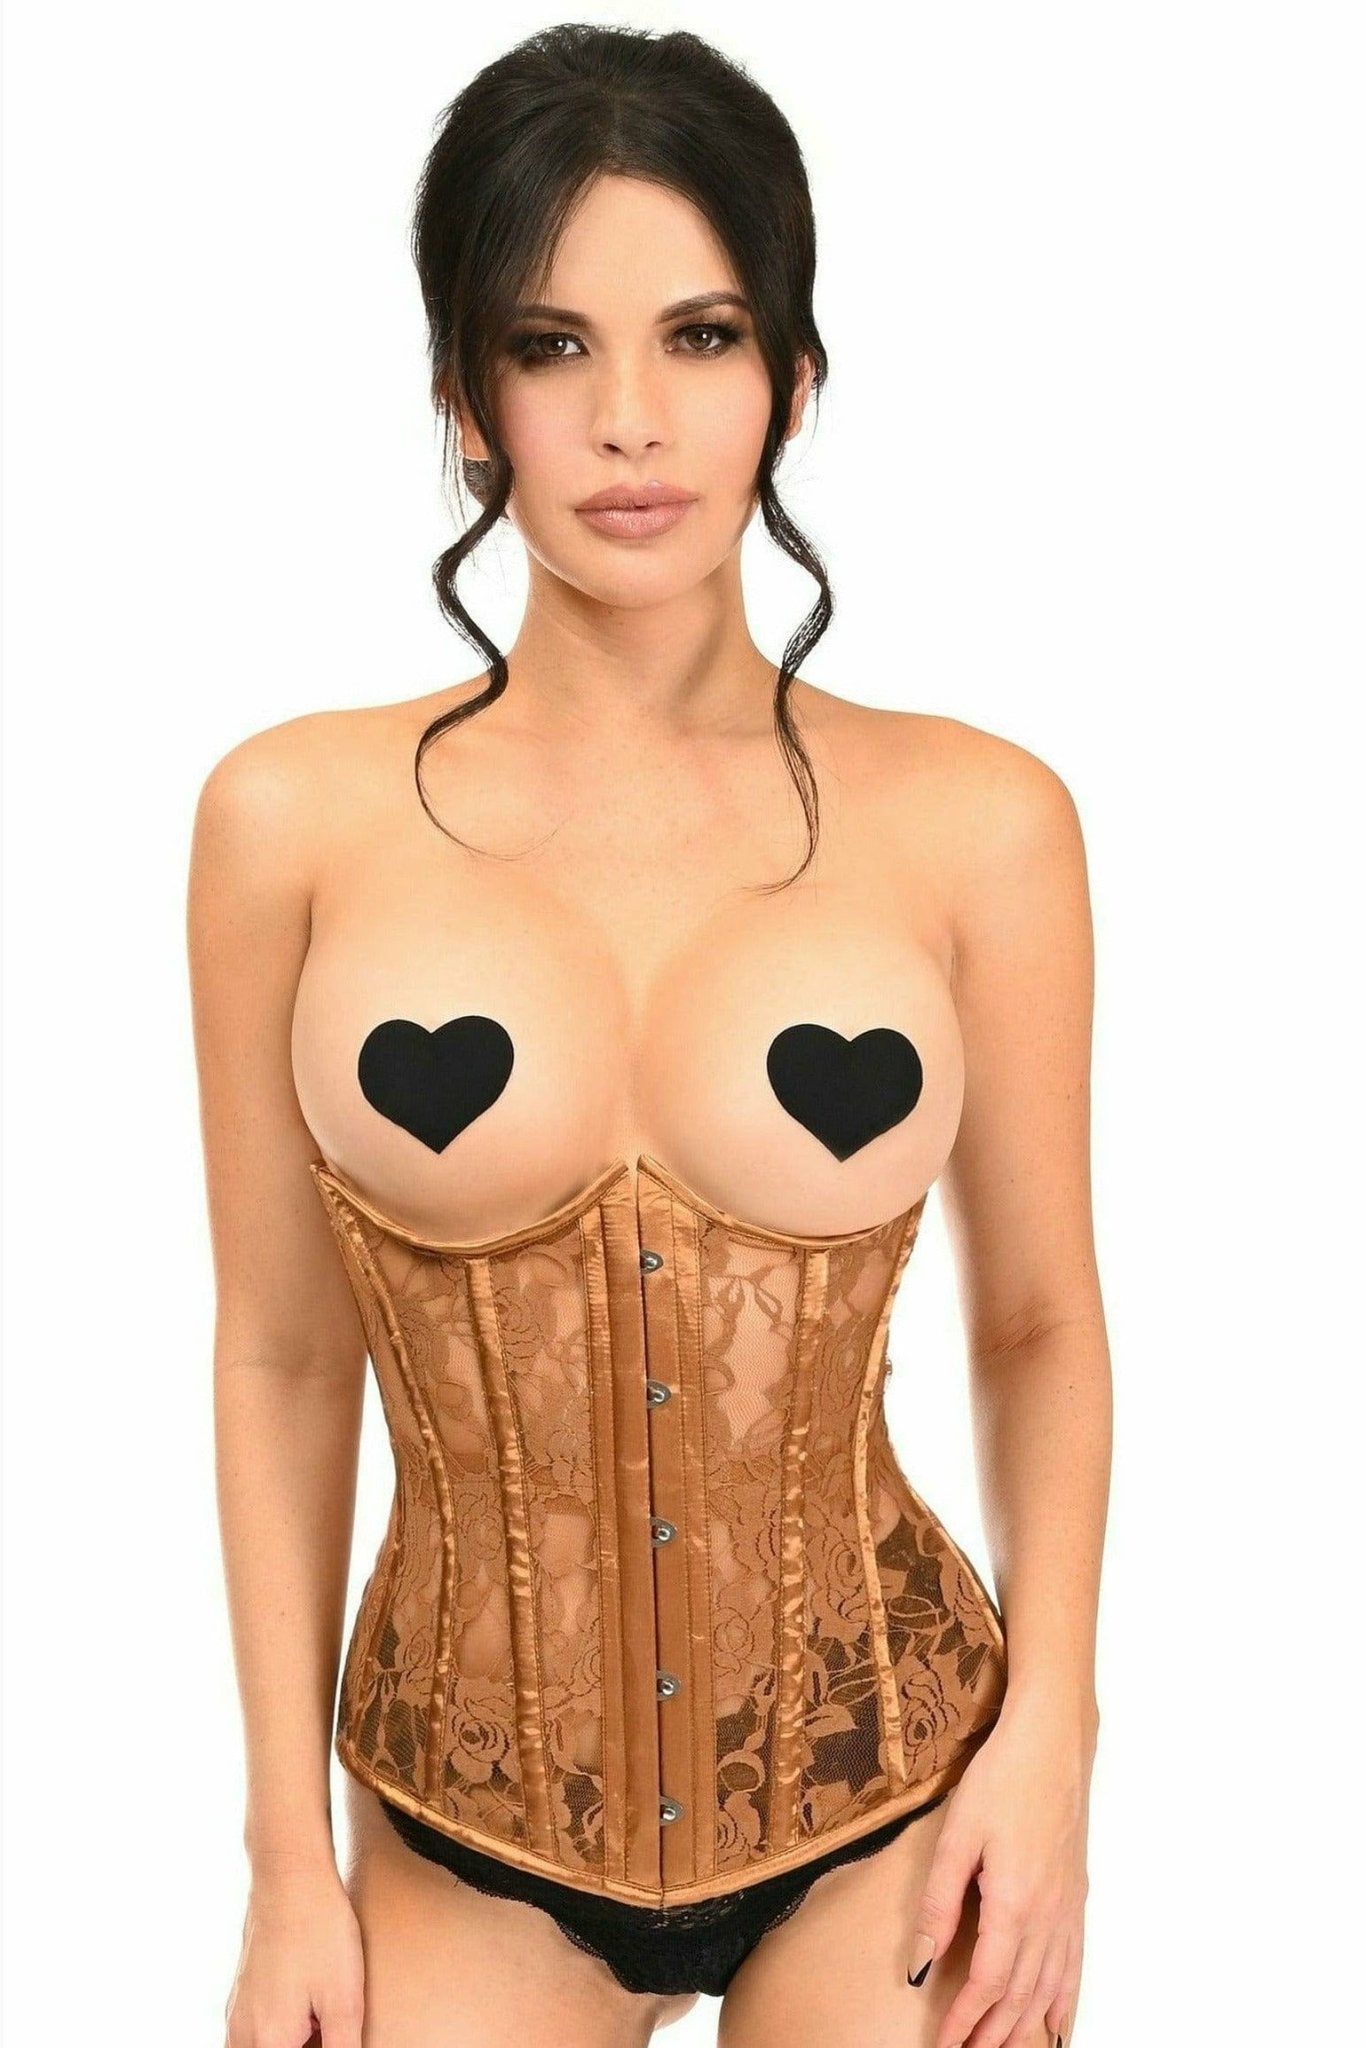 Sexy Caramel Sheer Lace Underwire Open Cup Underbust Corset Musotica.com